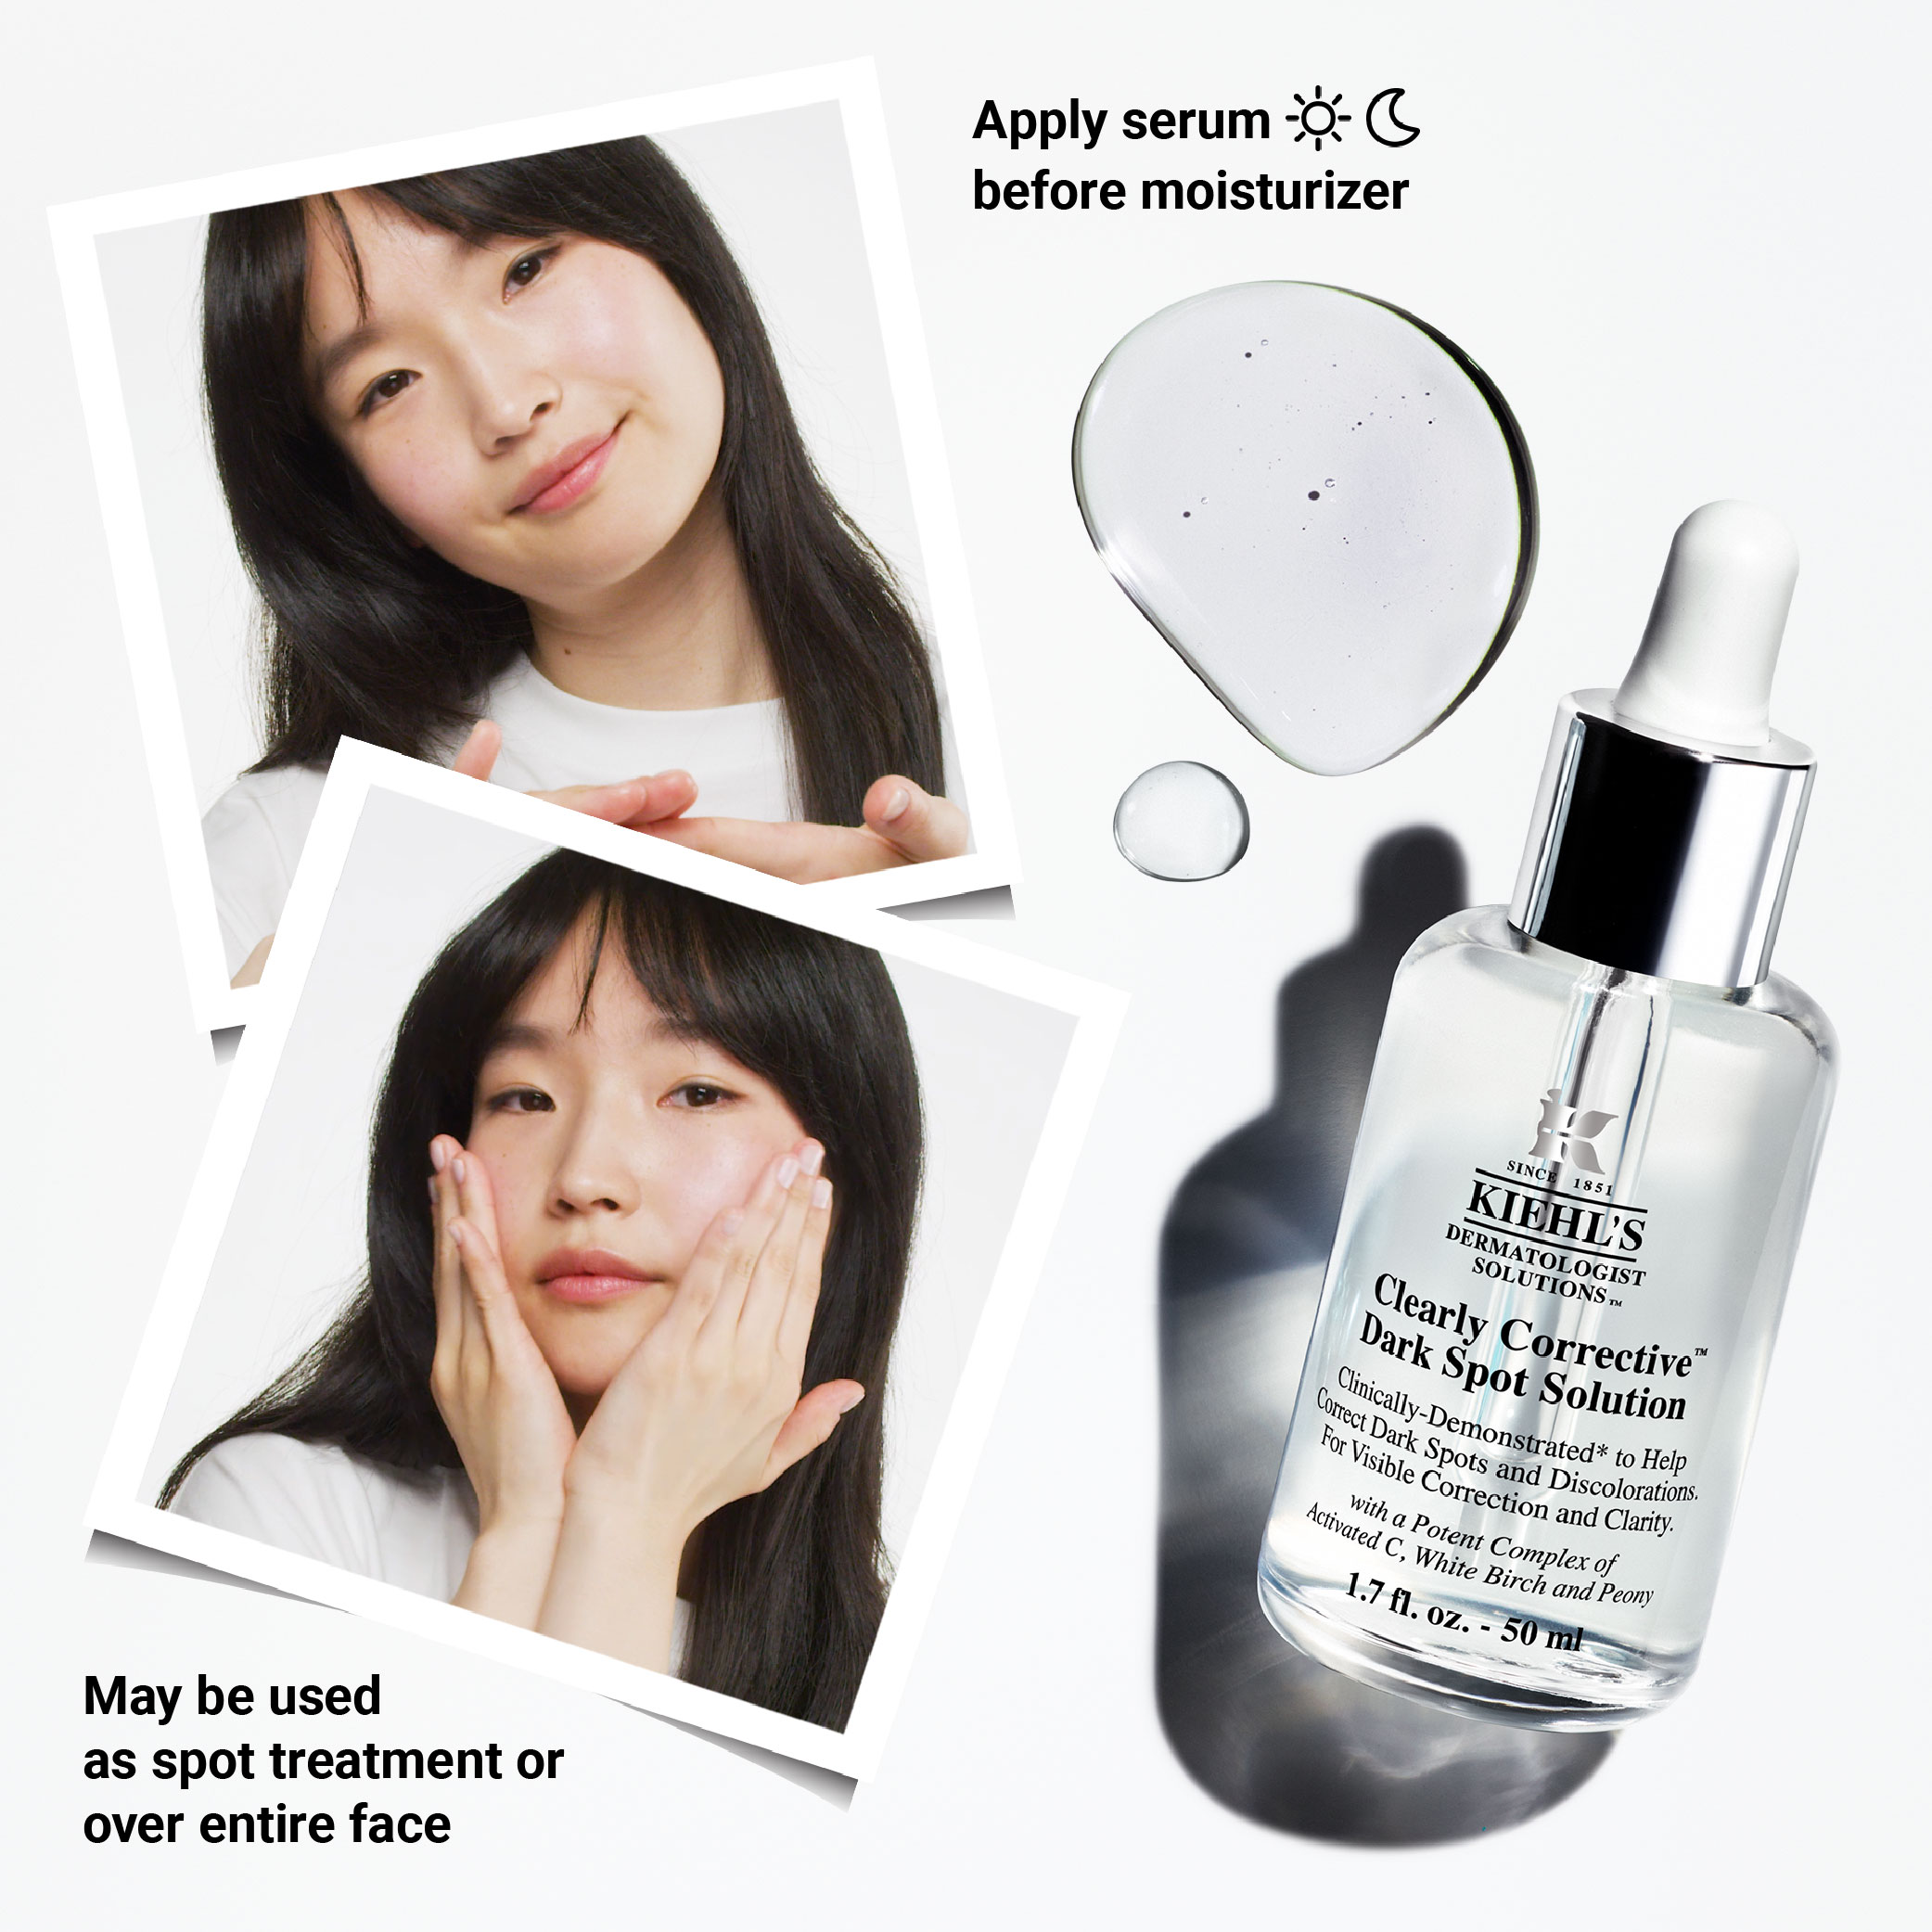 Clearly Corrective™ Dark Spot Solution Set